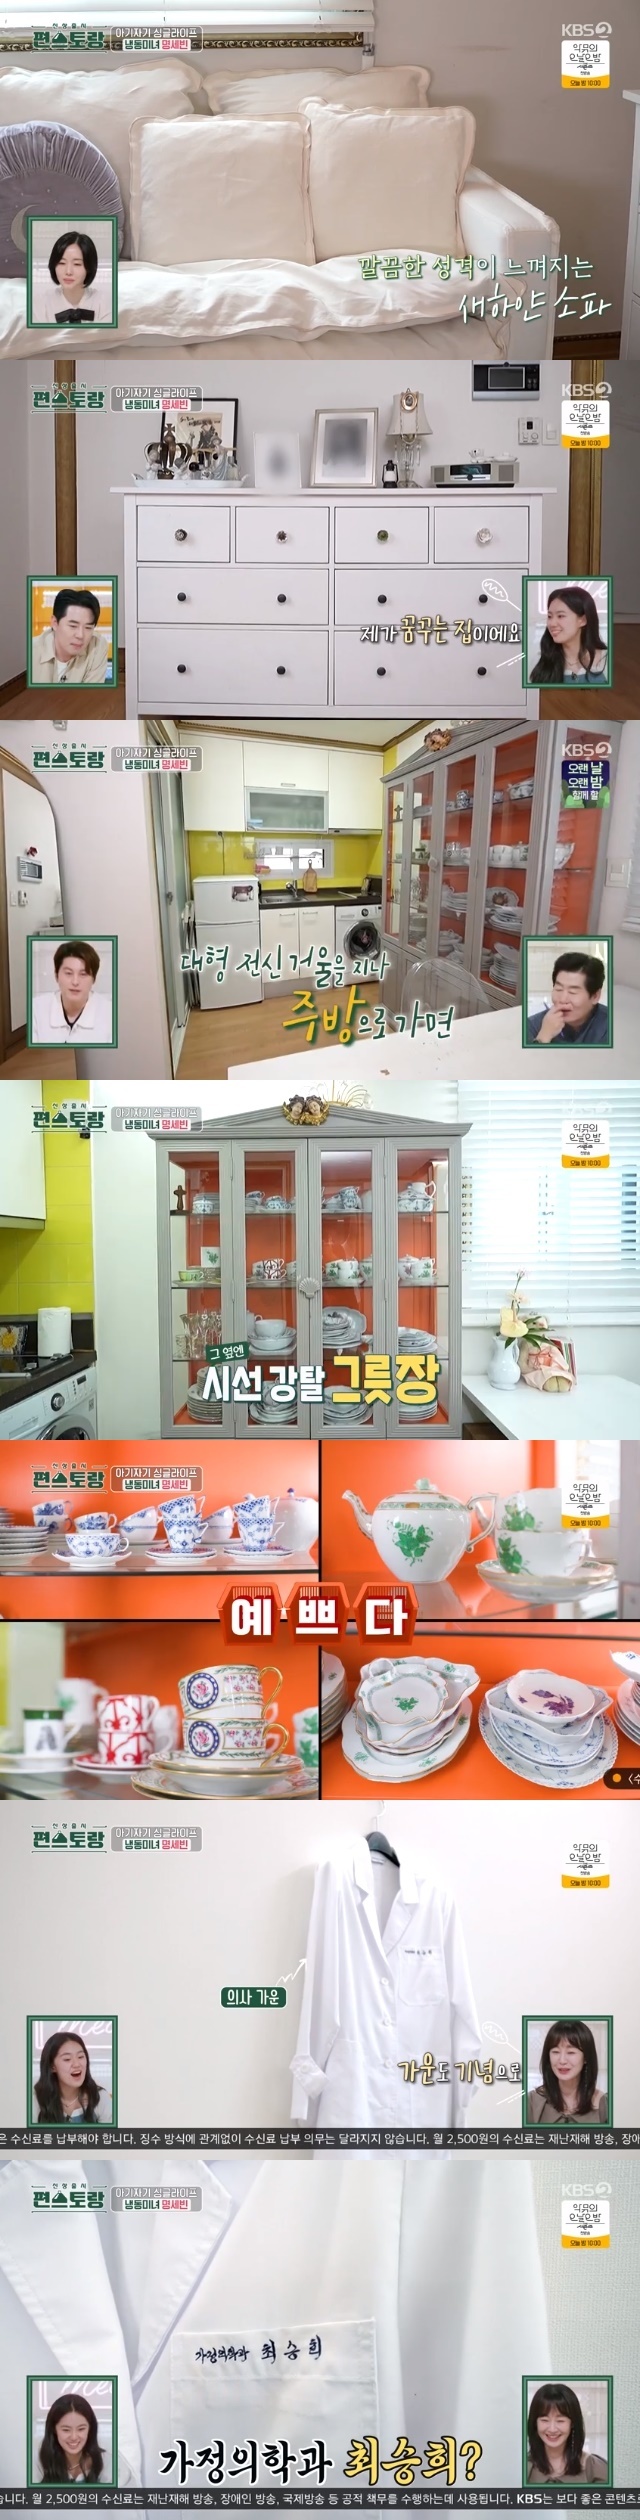 Actor Myung Se-bins house where he lives alone has been unveiled.Myung Se-bins house was unveiled at the 191st KBS 2TV entertainment show Stars Top Recipe at Fun-Staurant (hereinafter referred to as Stars Top Recipe at Fun-Staurant) on September 1.Lee Se-yeon, the actor of The Doctor Cha Jung-sook, who saw Myung Se-bins house on the day, admired it as my romance house. It is a minimalist kitchen on a pure white sofa, and a colorful crockery box.Among them, a doctors gown hung on one side and caught the eye. The gown had the name of Choi Seung Hee, the role of Myung Se-bin in The Doctor Cha Jung Sook. Myung Se-bin said, Did you bring it?He said, (I brought it) as a memorial. 